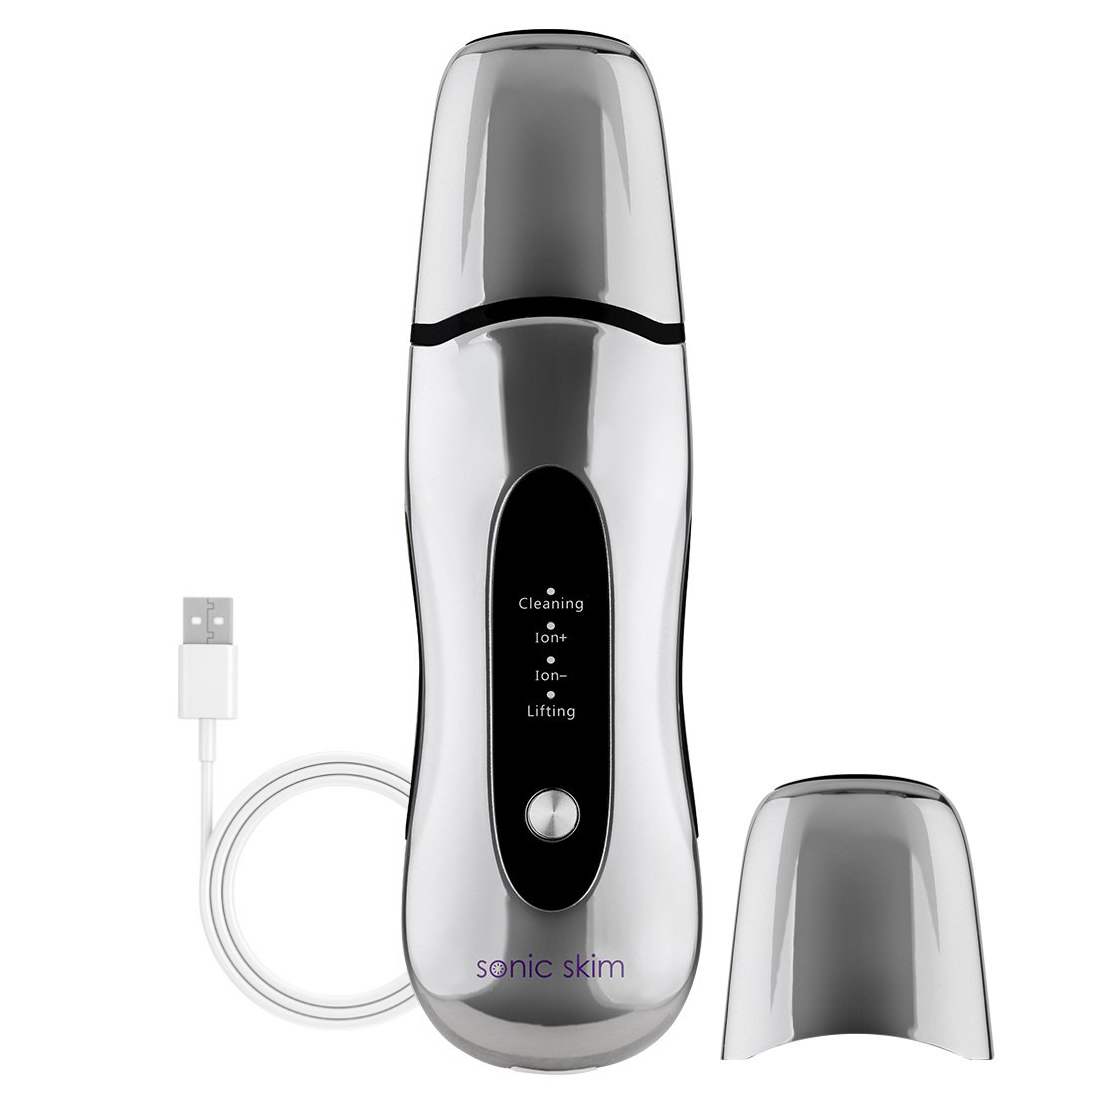 A sleek silver Glow All Day electric hair trimmer from Michael Todd Beauty that comes with a USB charger.